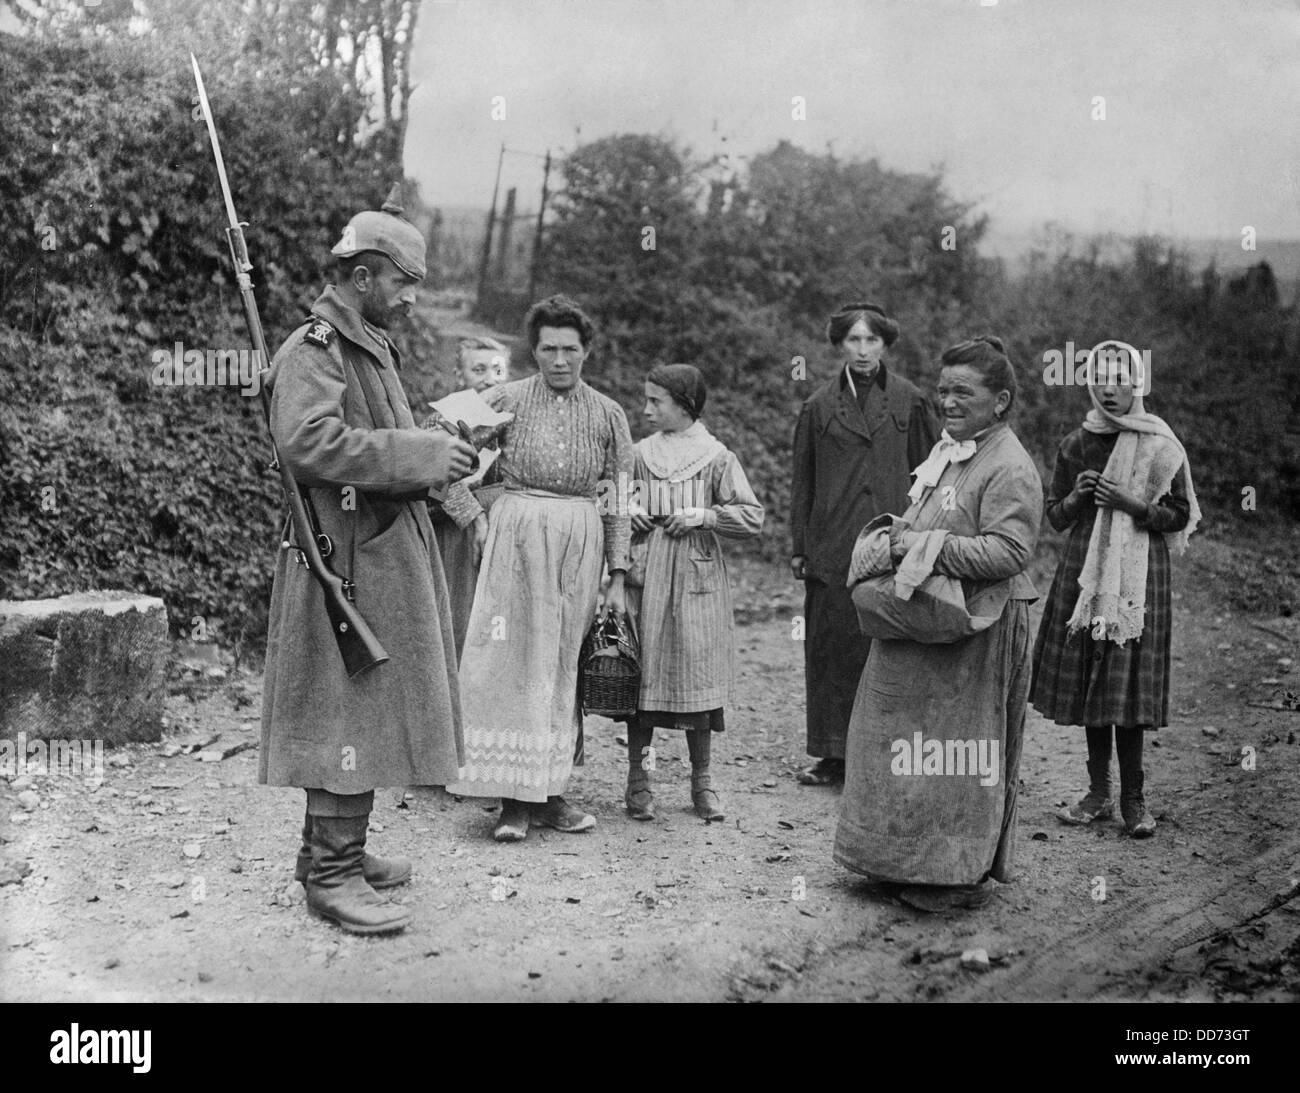 WW1 German soldier inspects documents of women in occupied France. 1915-16. (BSLOC 2012 4 46) Stock Photo